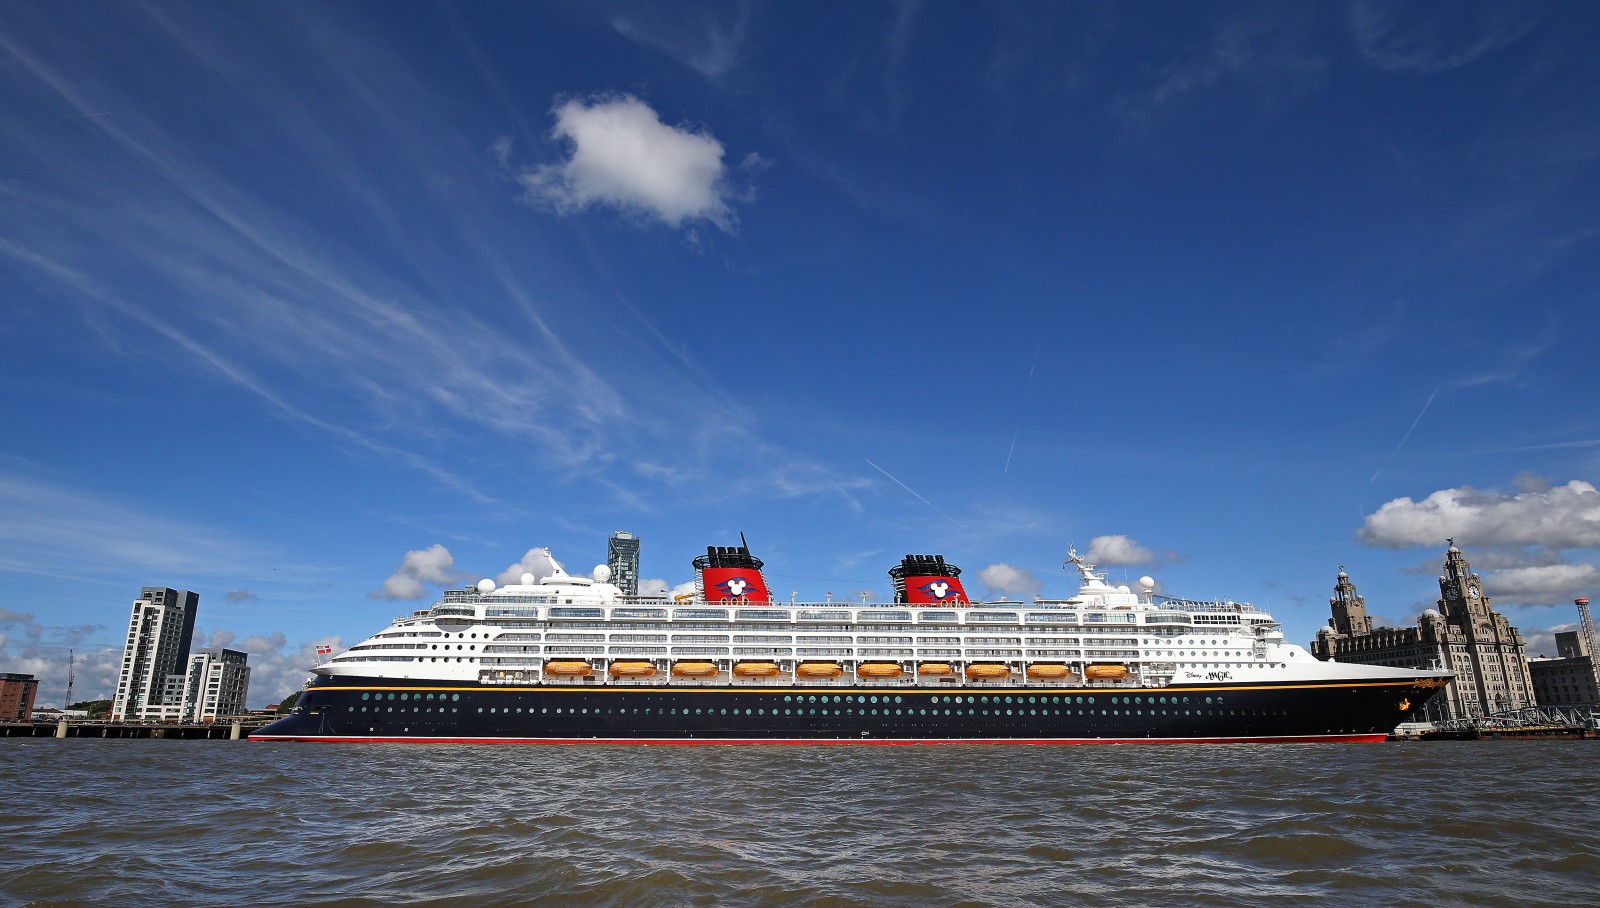 is the disney cruise ship in liverpool